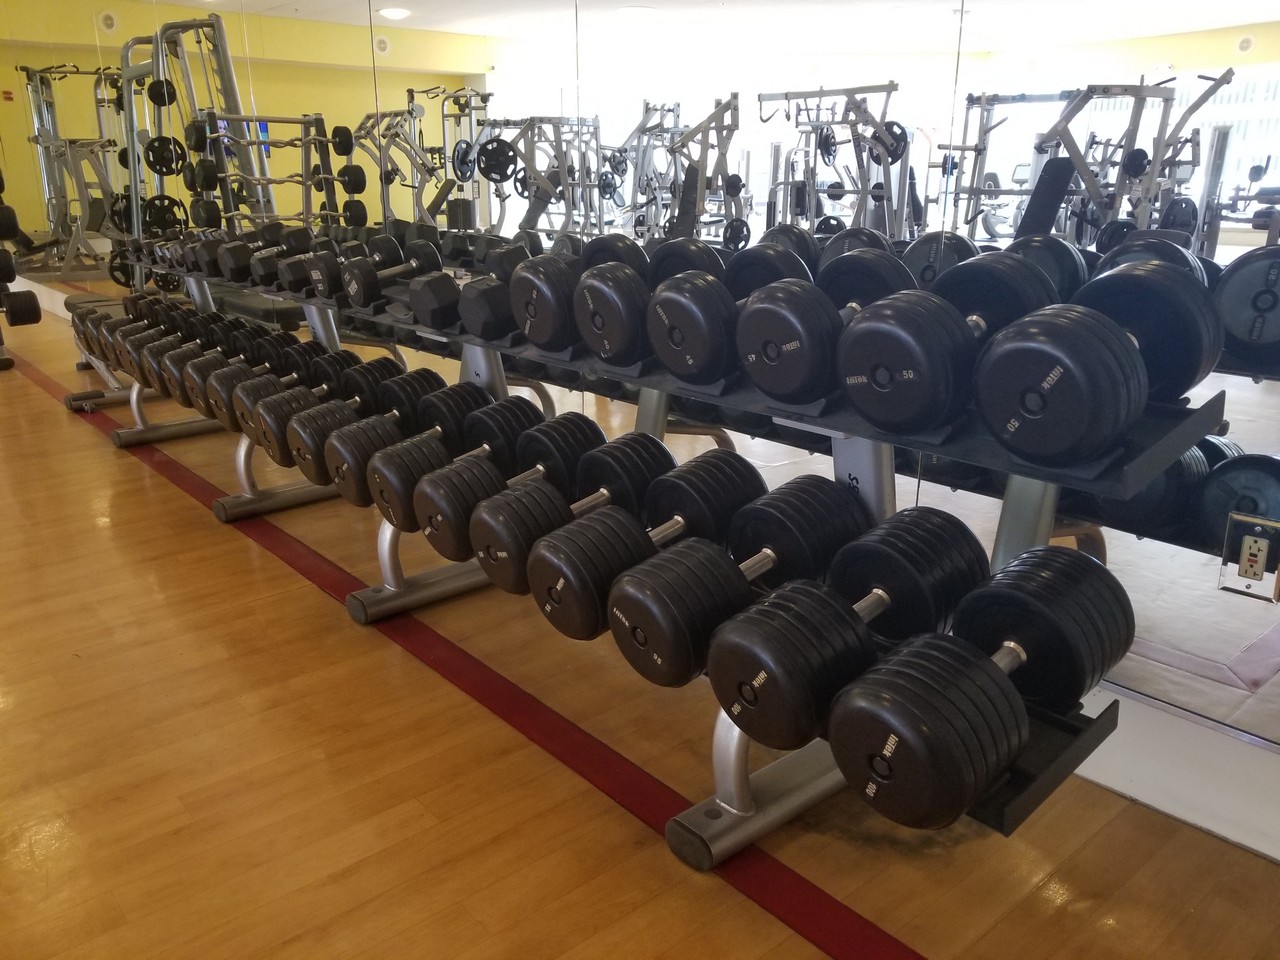 a row of weights on a rack